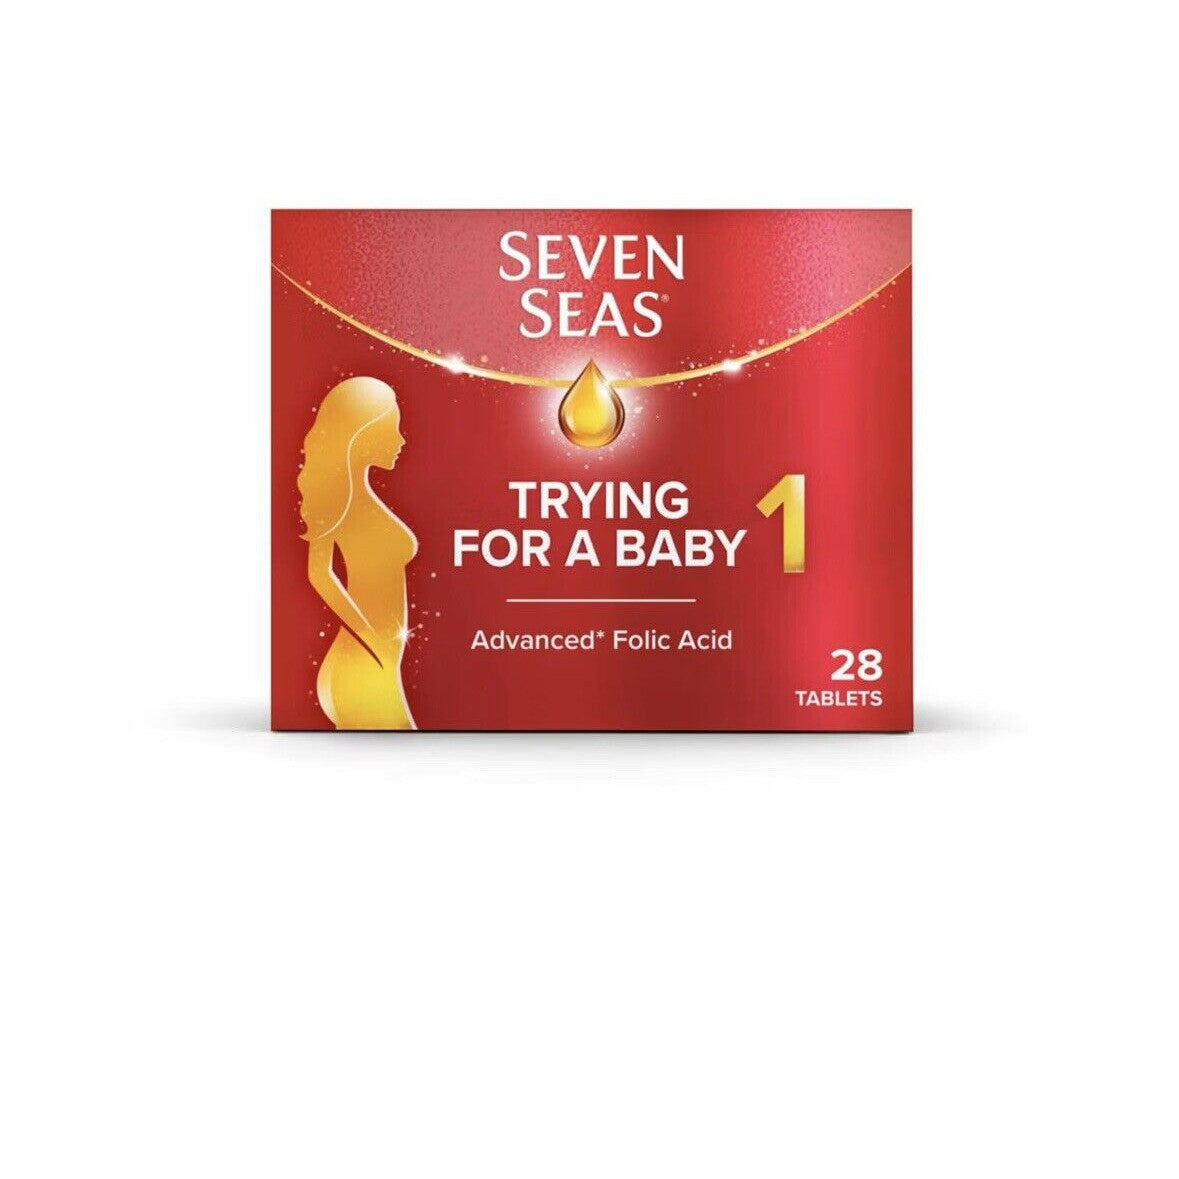 Seven Seas Trying for a Baby, Prenatal Vitamins with Advanced Folic Acid - 28 Tablets